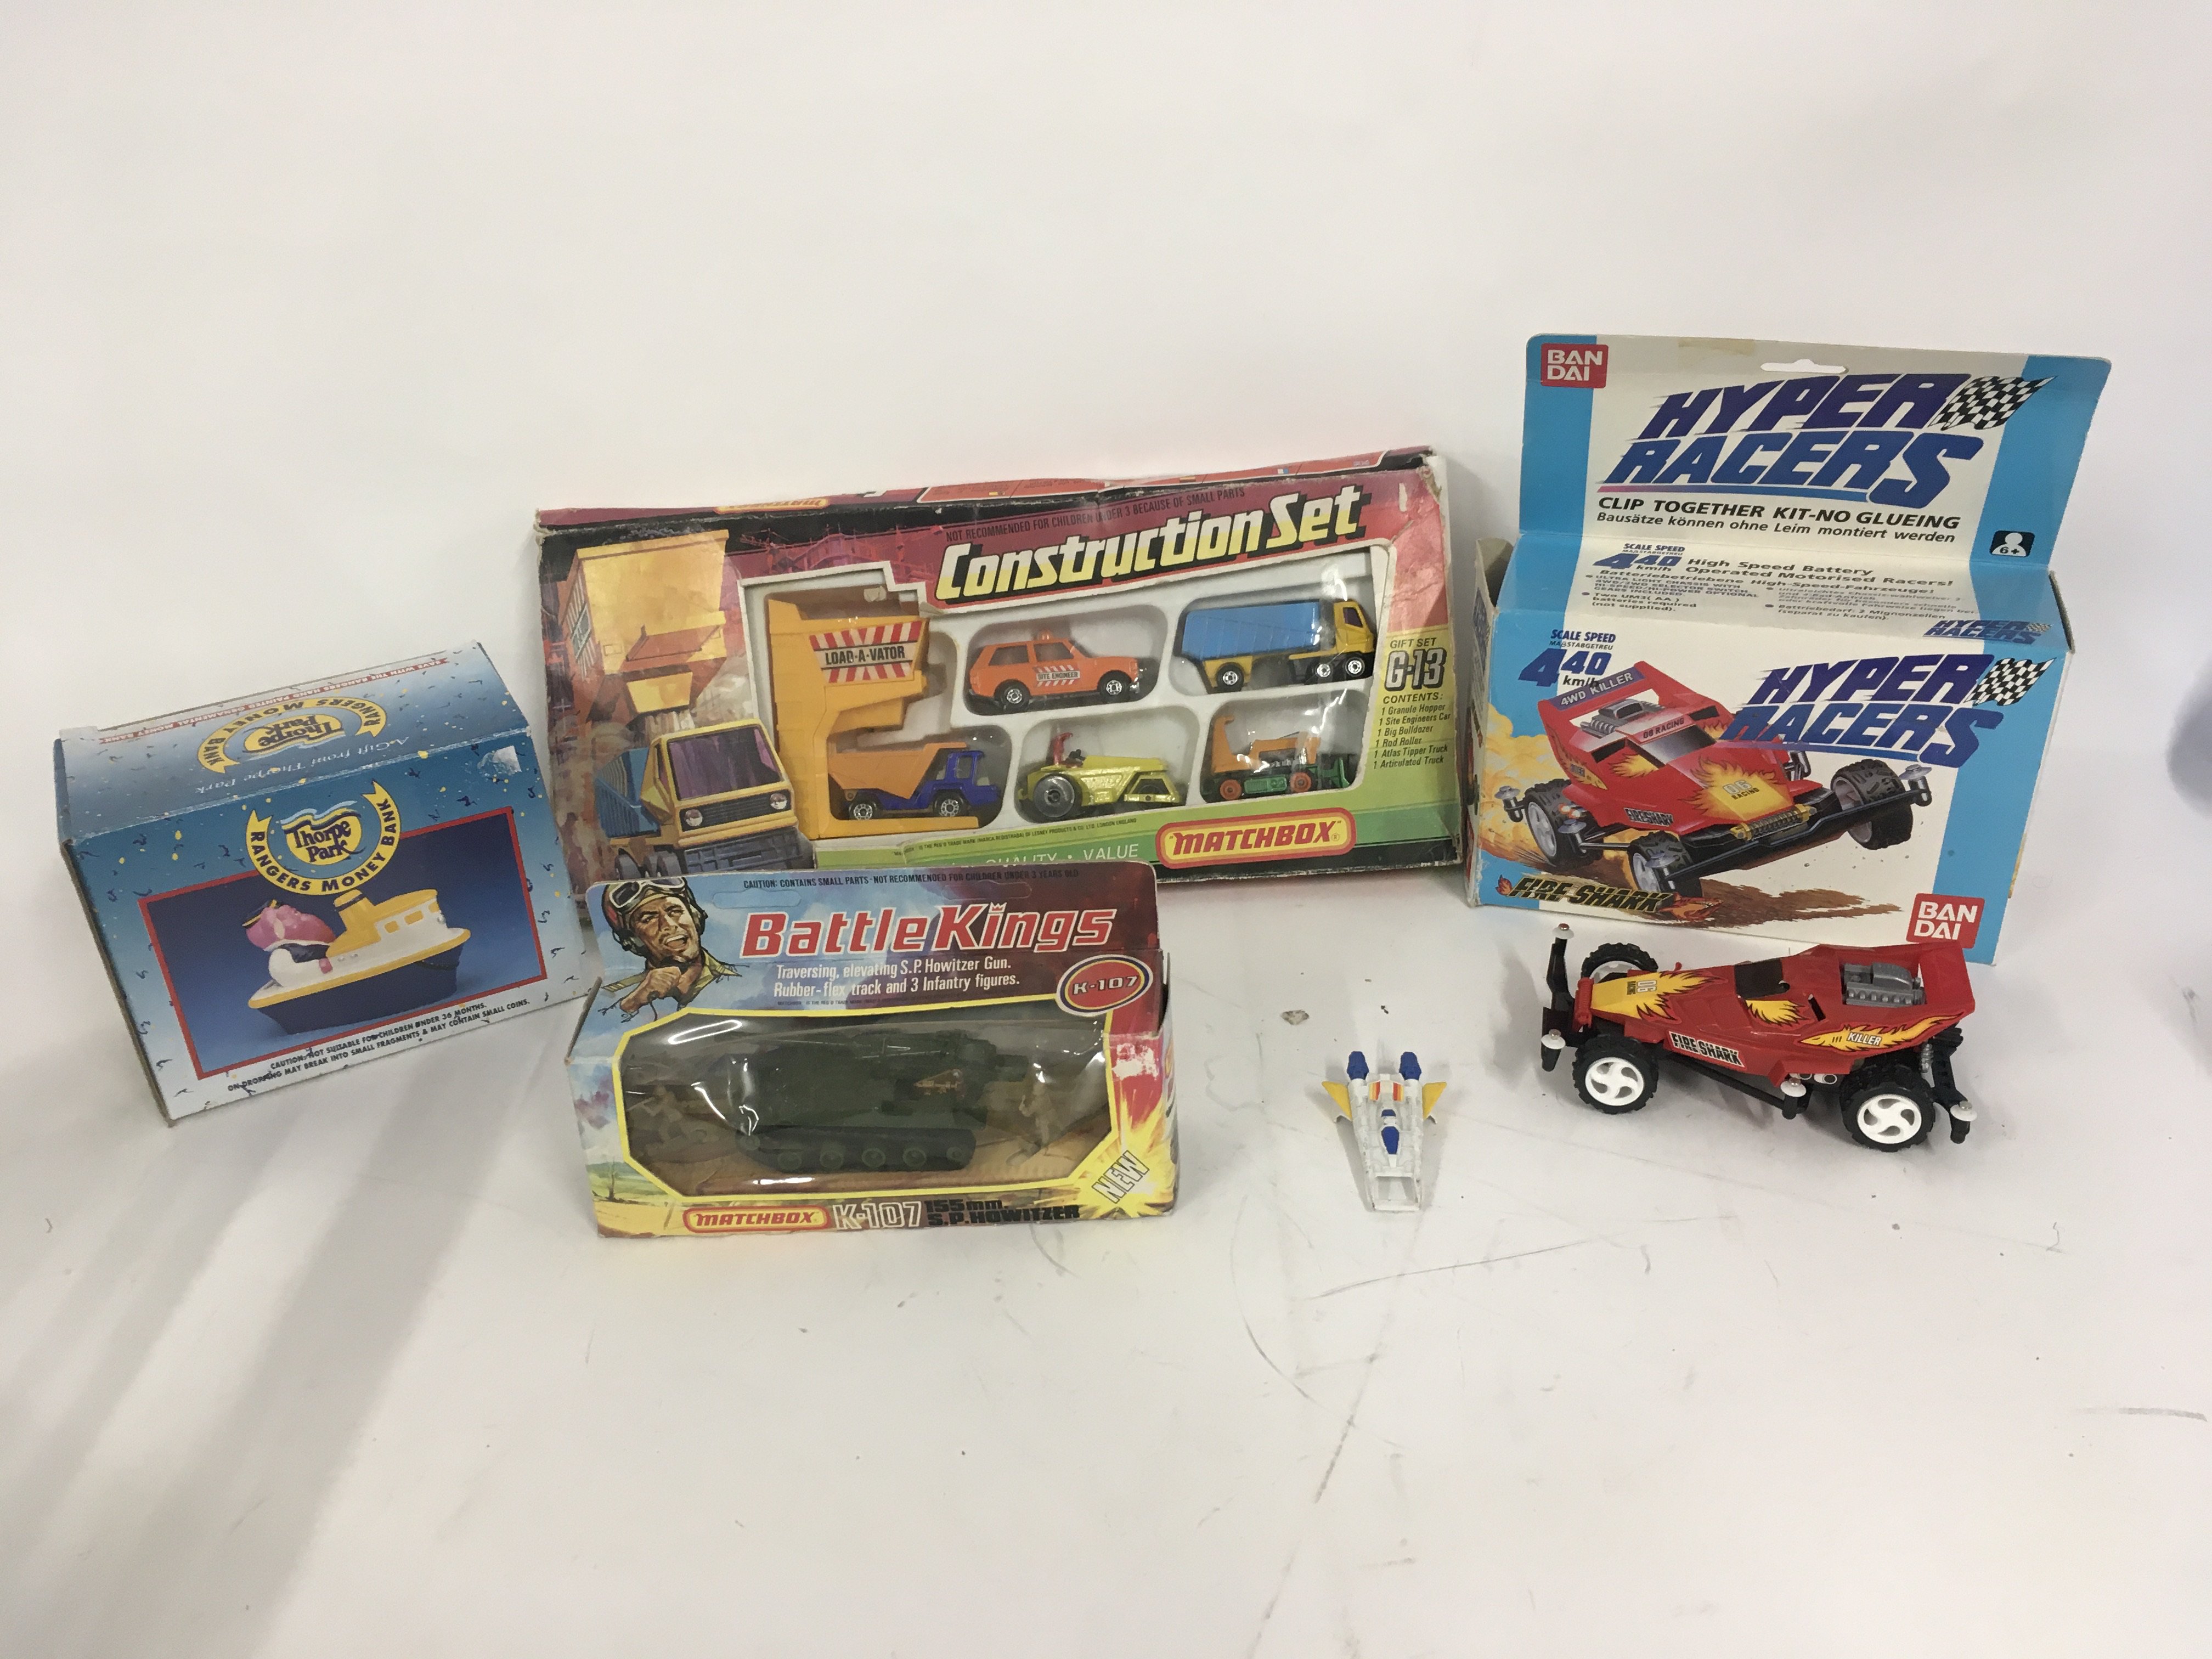 A collection of diecast cars and vehicles.